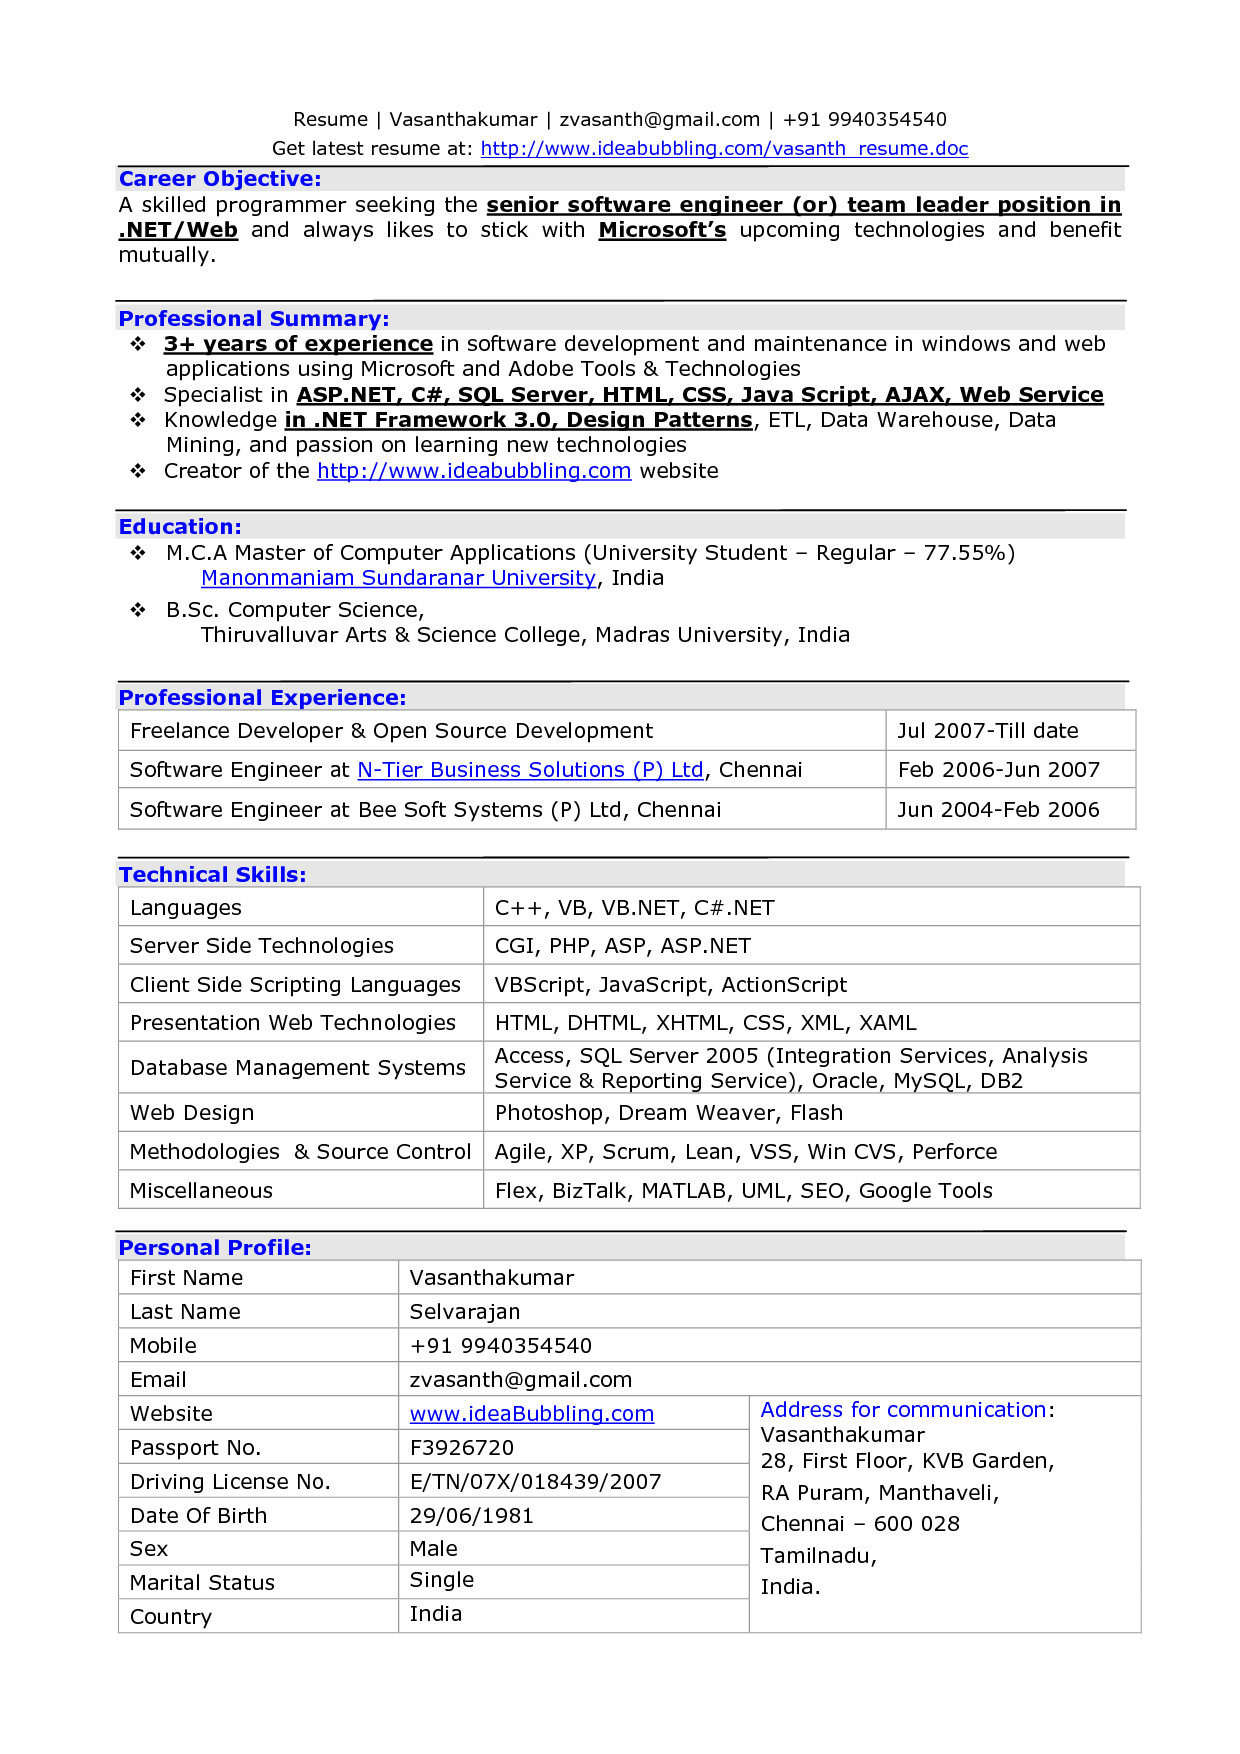 Sample Resume for Experienced software Engineer Resume Experienced software Engineer